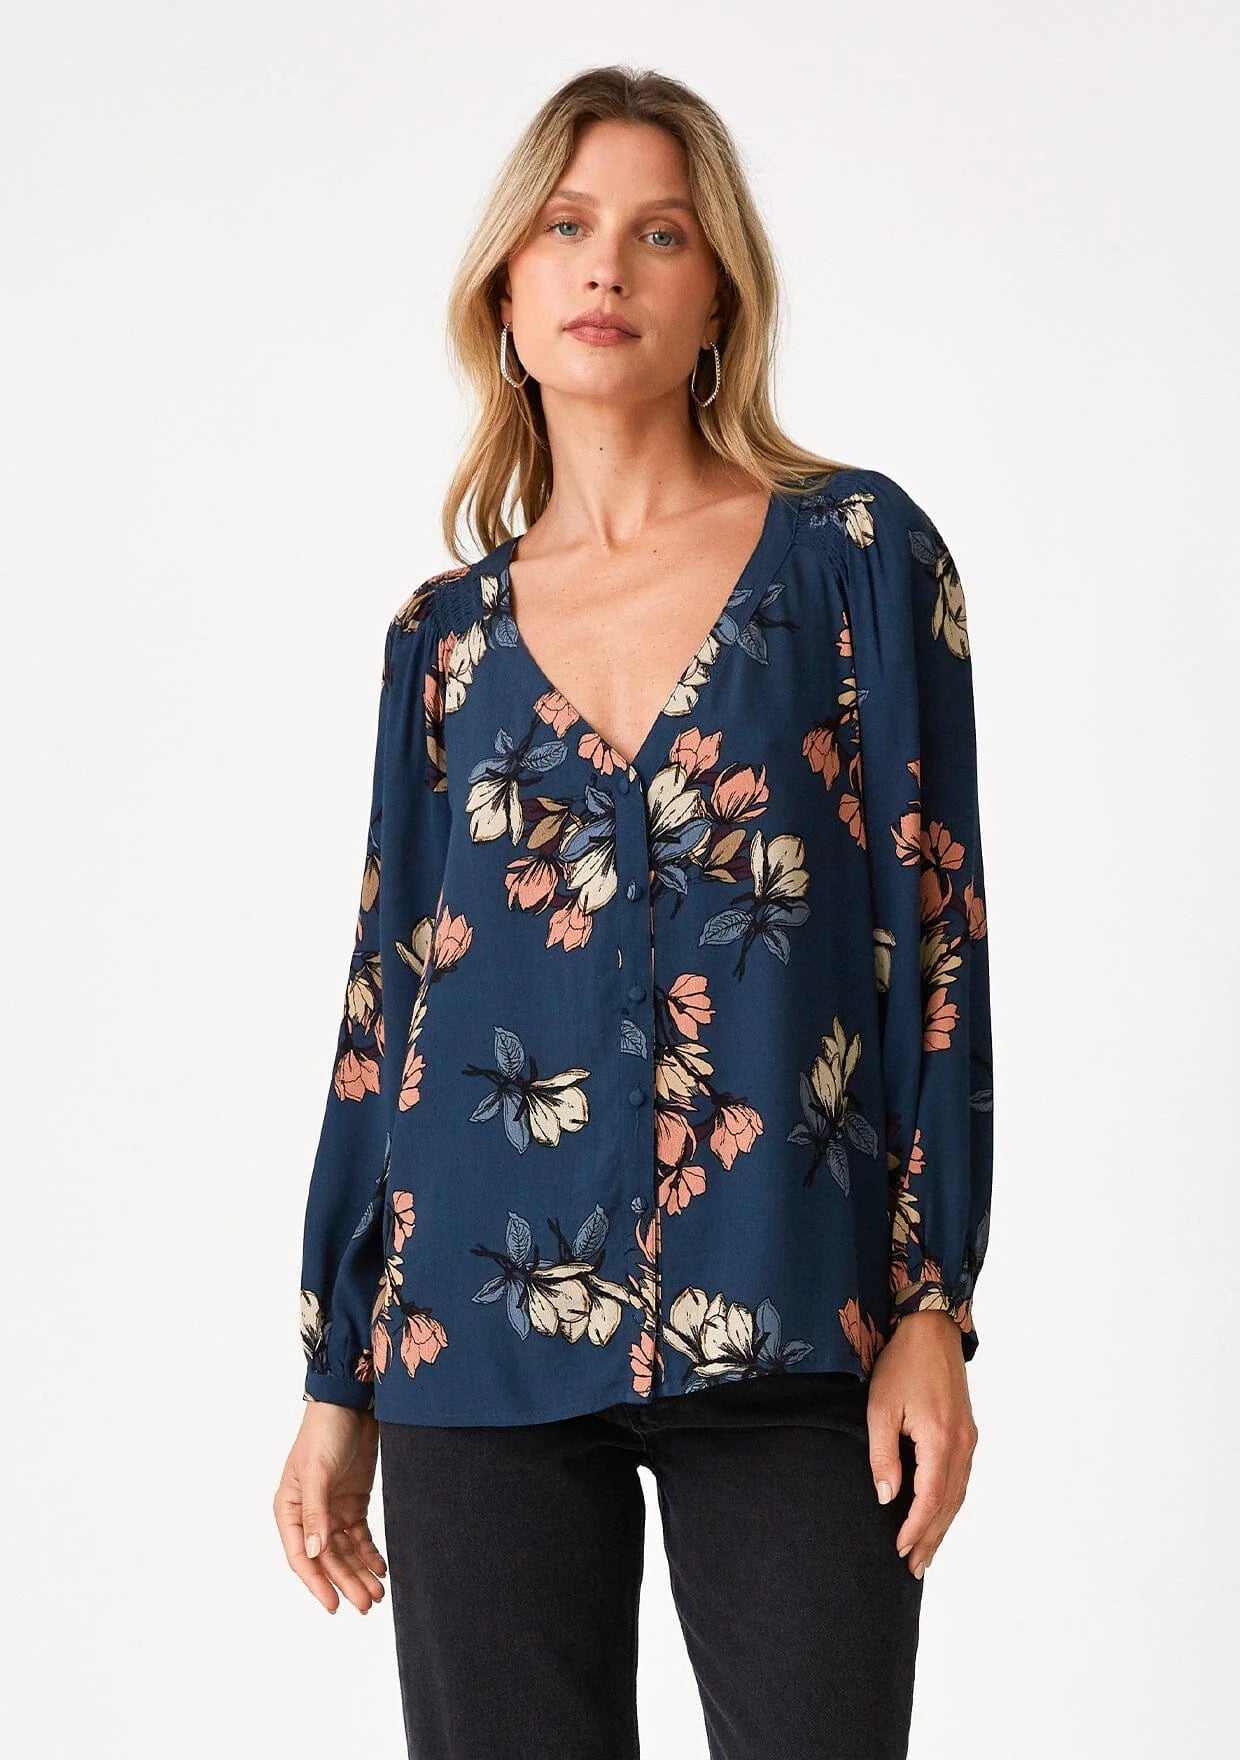 The Napa Floral Blouse